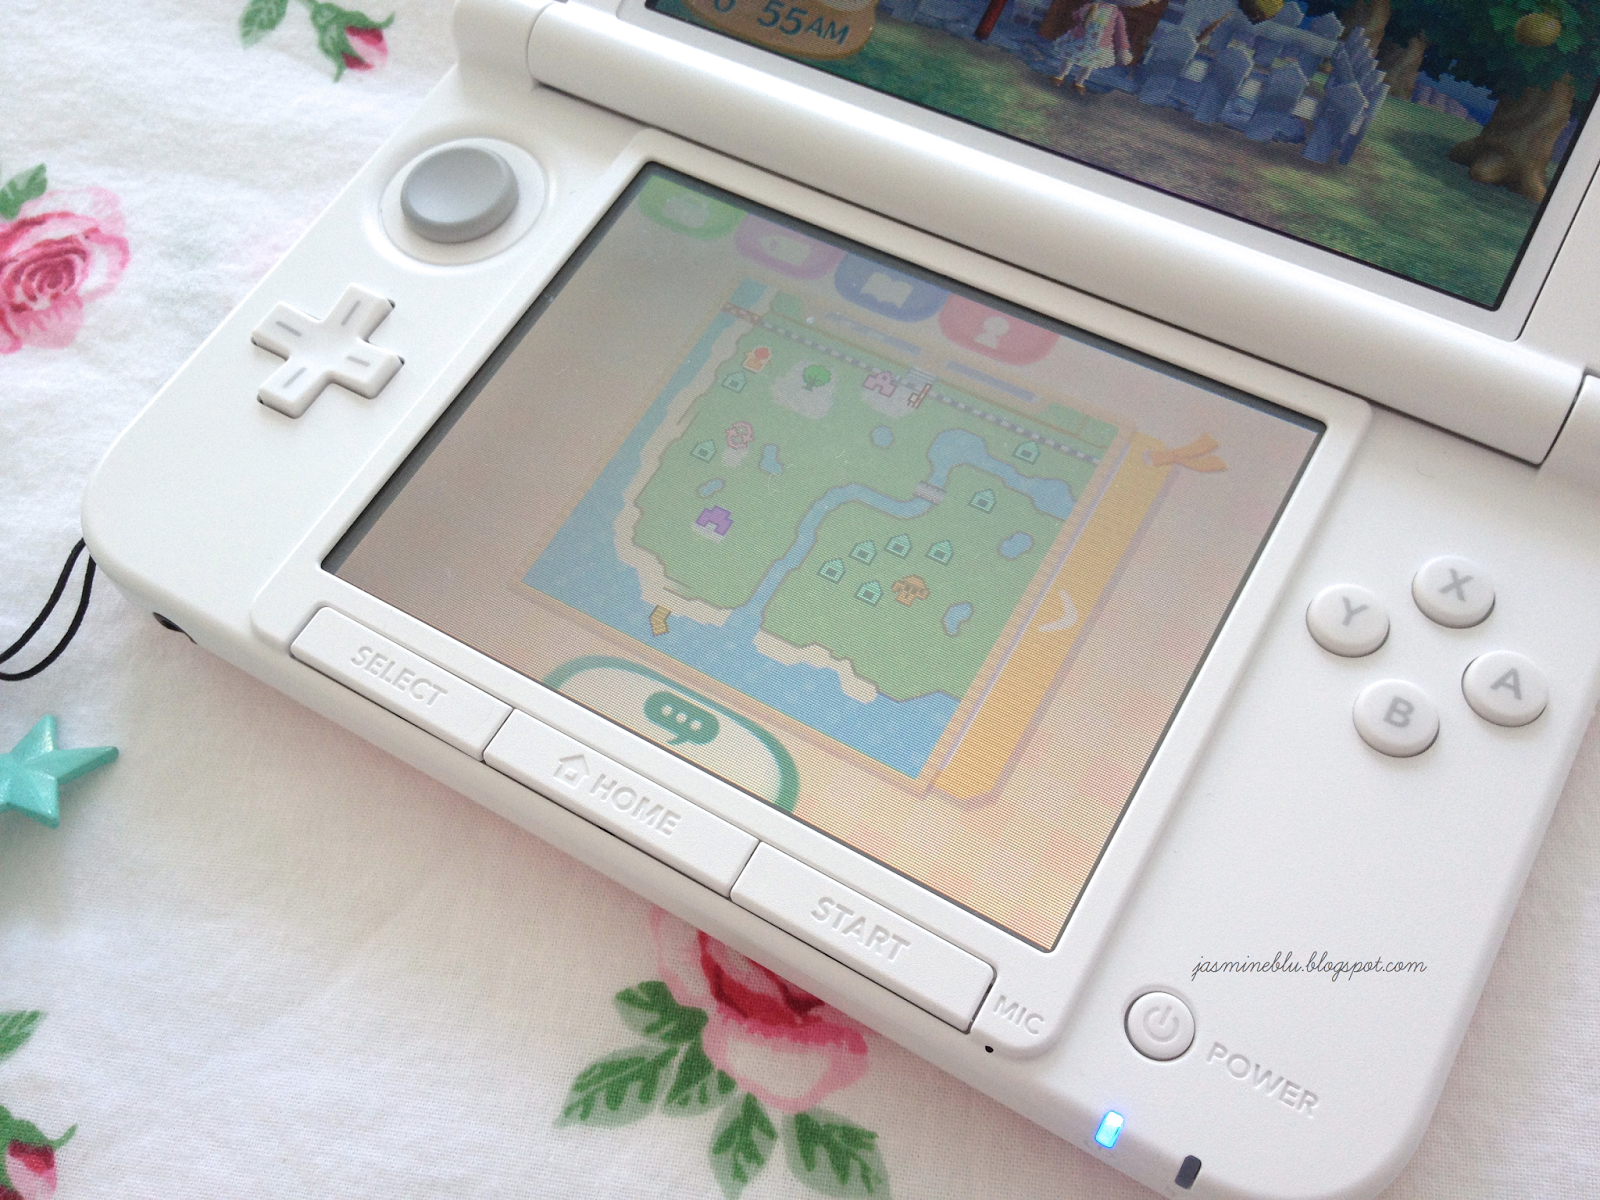 bottom screen, this is the touch screen one. Playing animal crossing ...